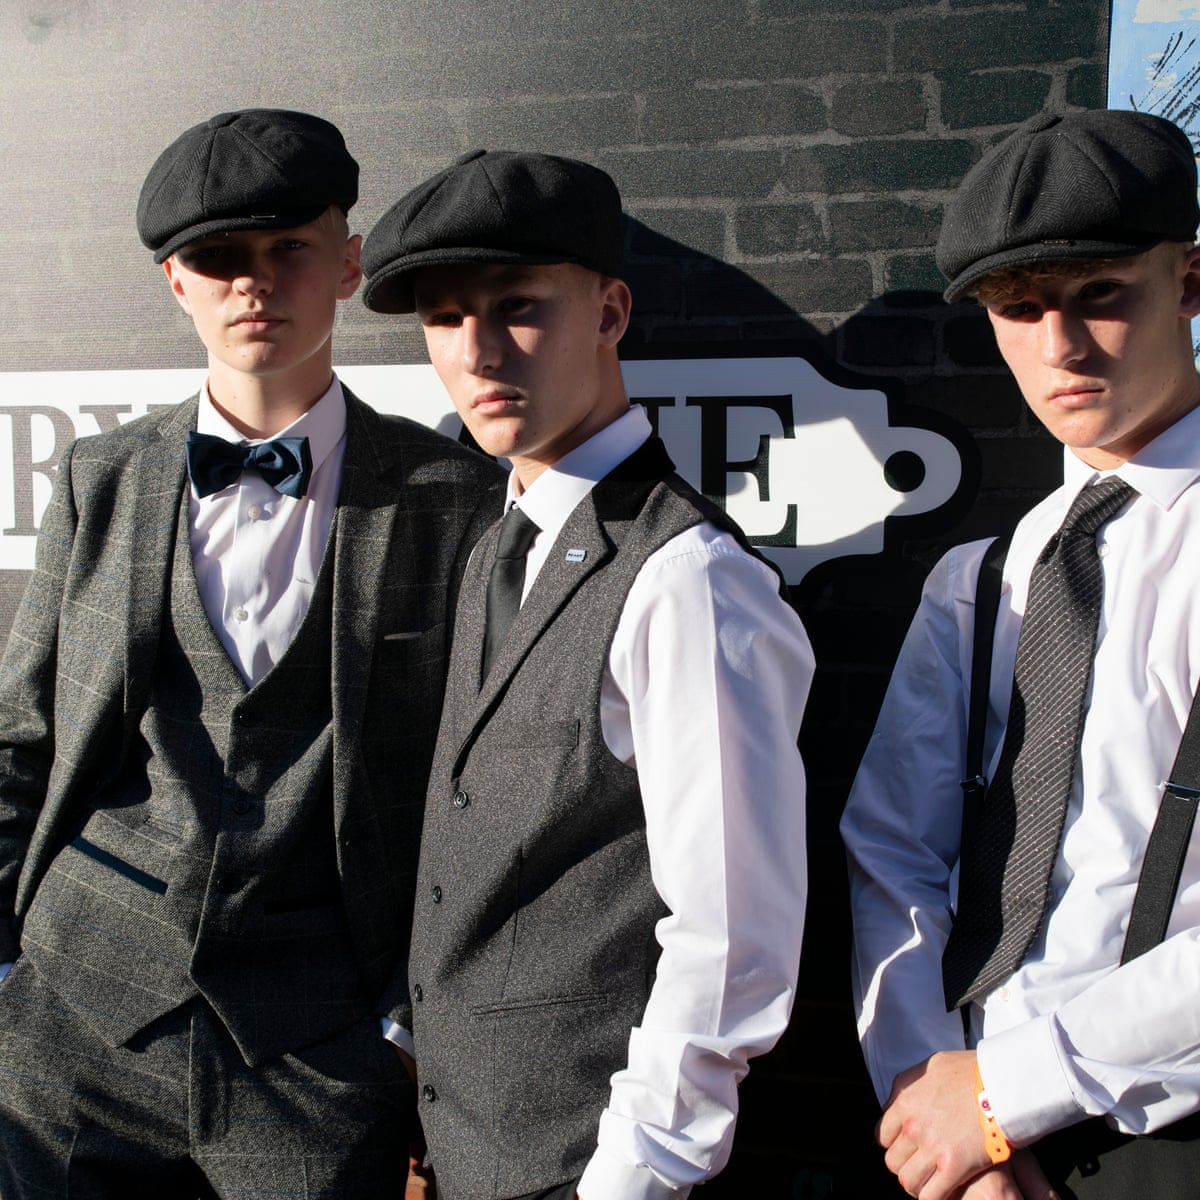 Flat cap nation: how Peaky Blinders went from a TV show to a way of life, Peaky  Blinders